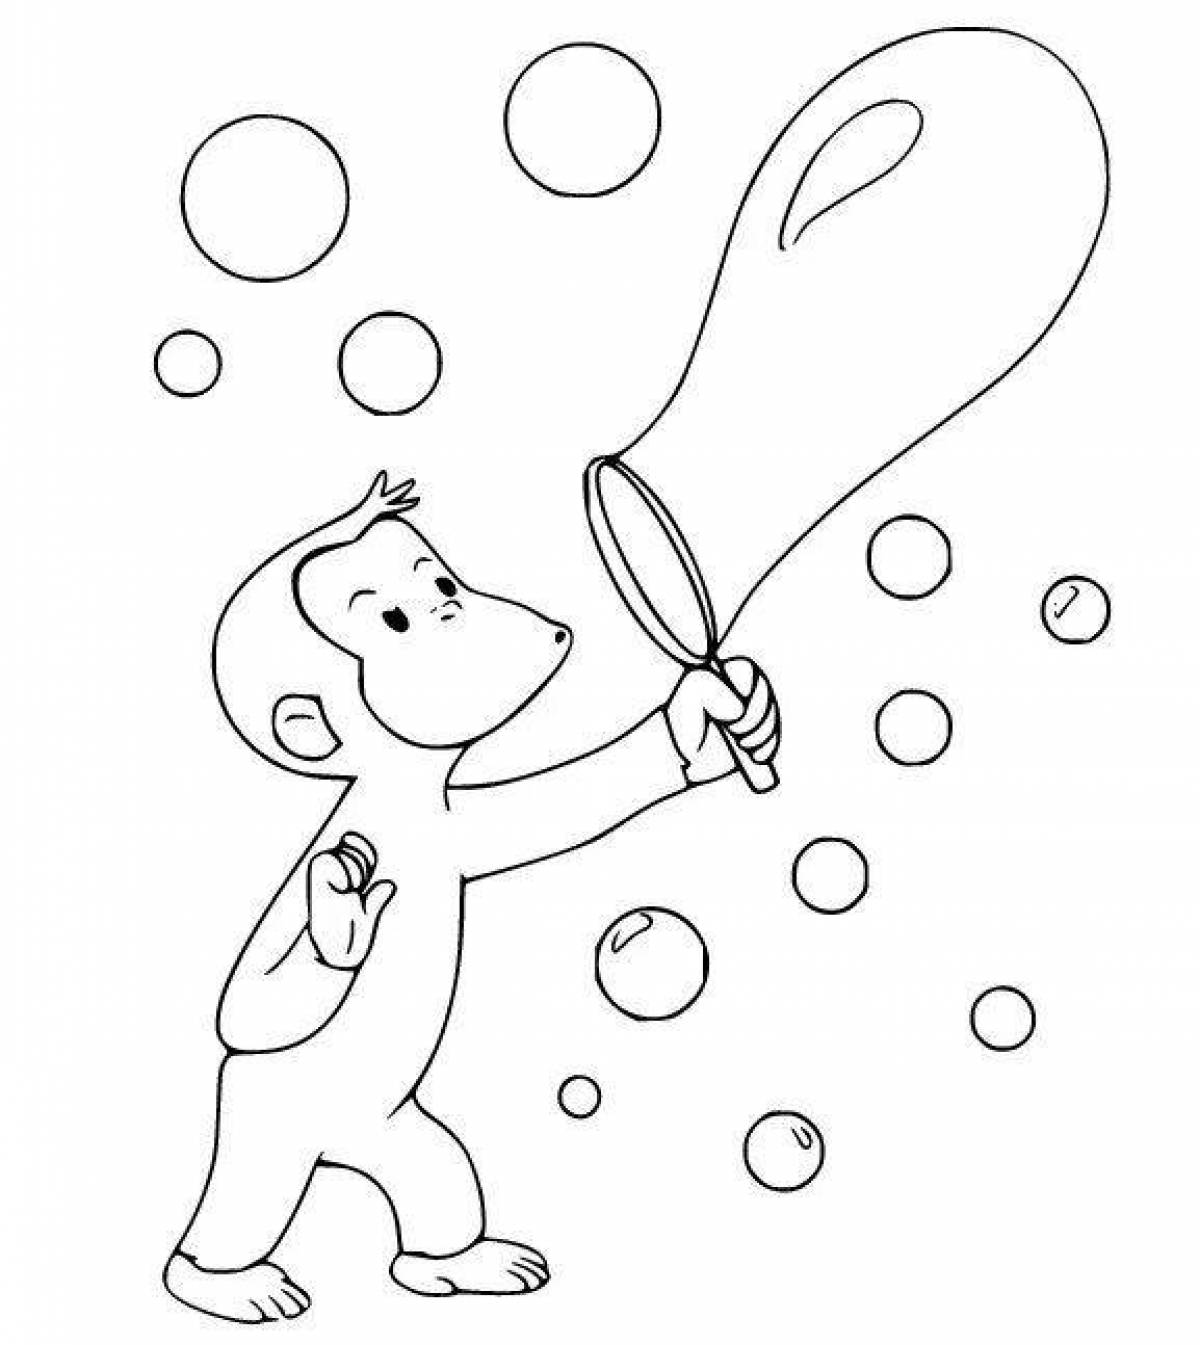 Attractive bubble coloring page